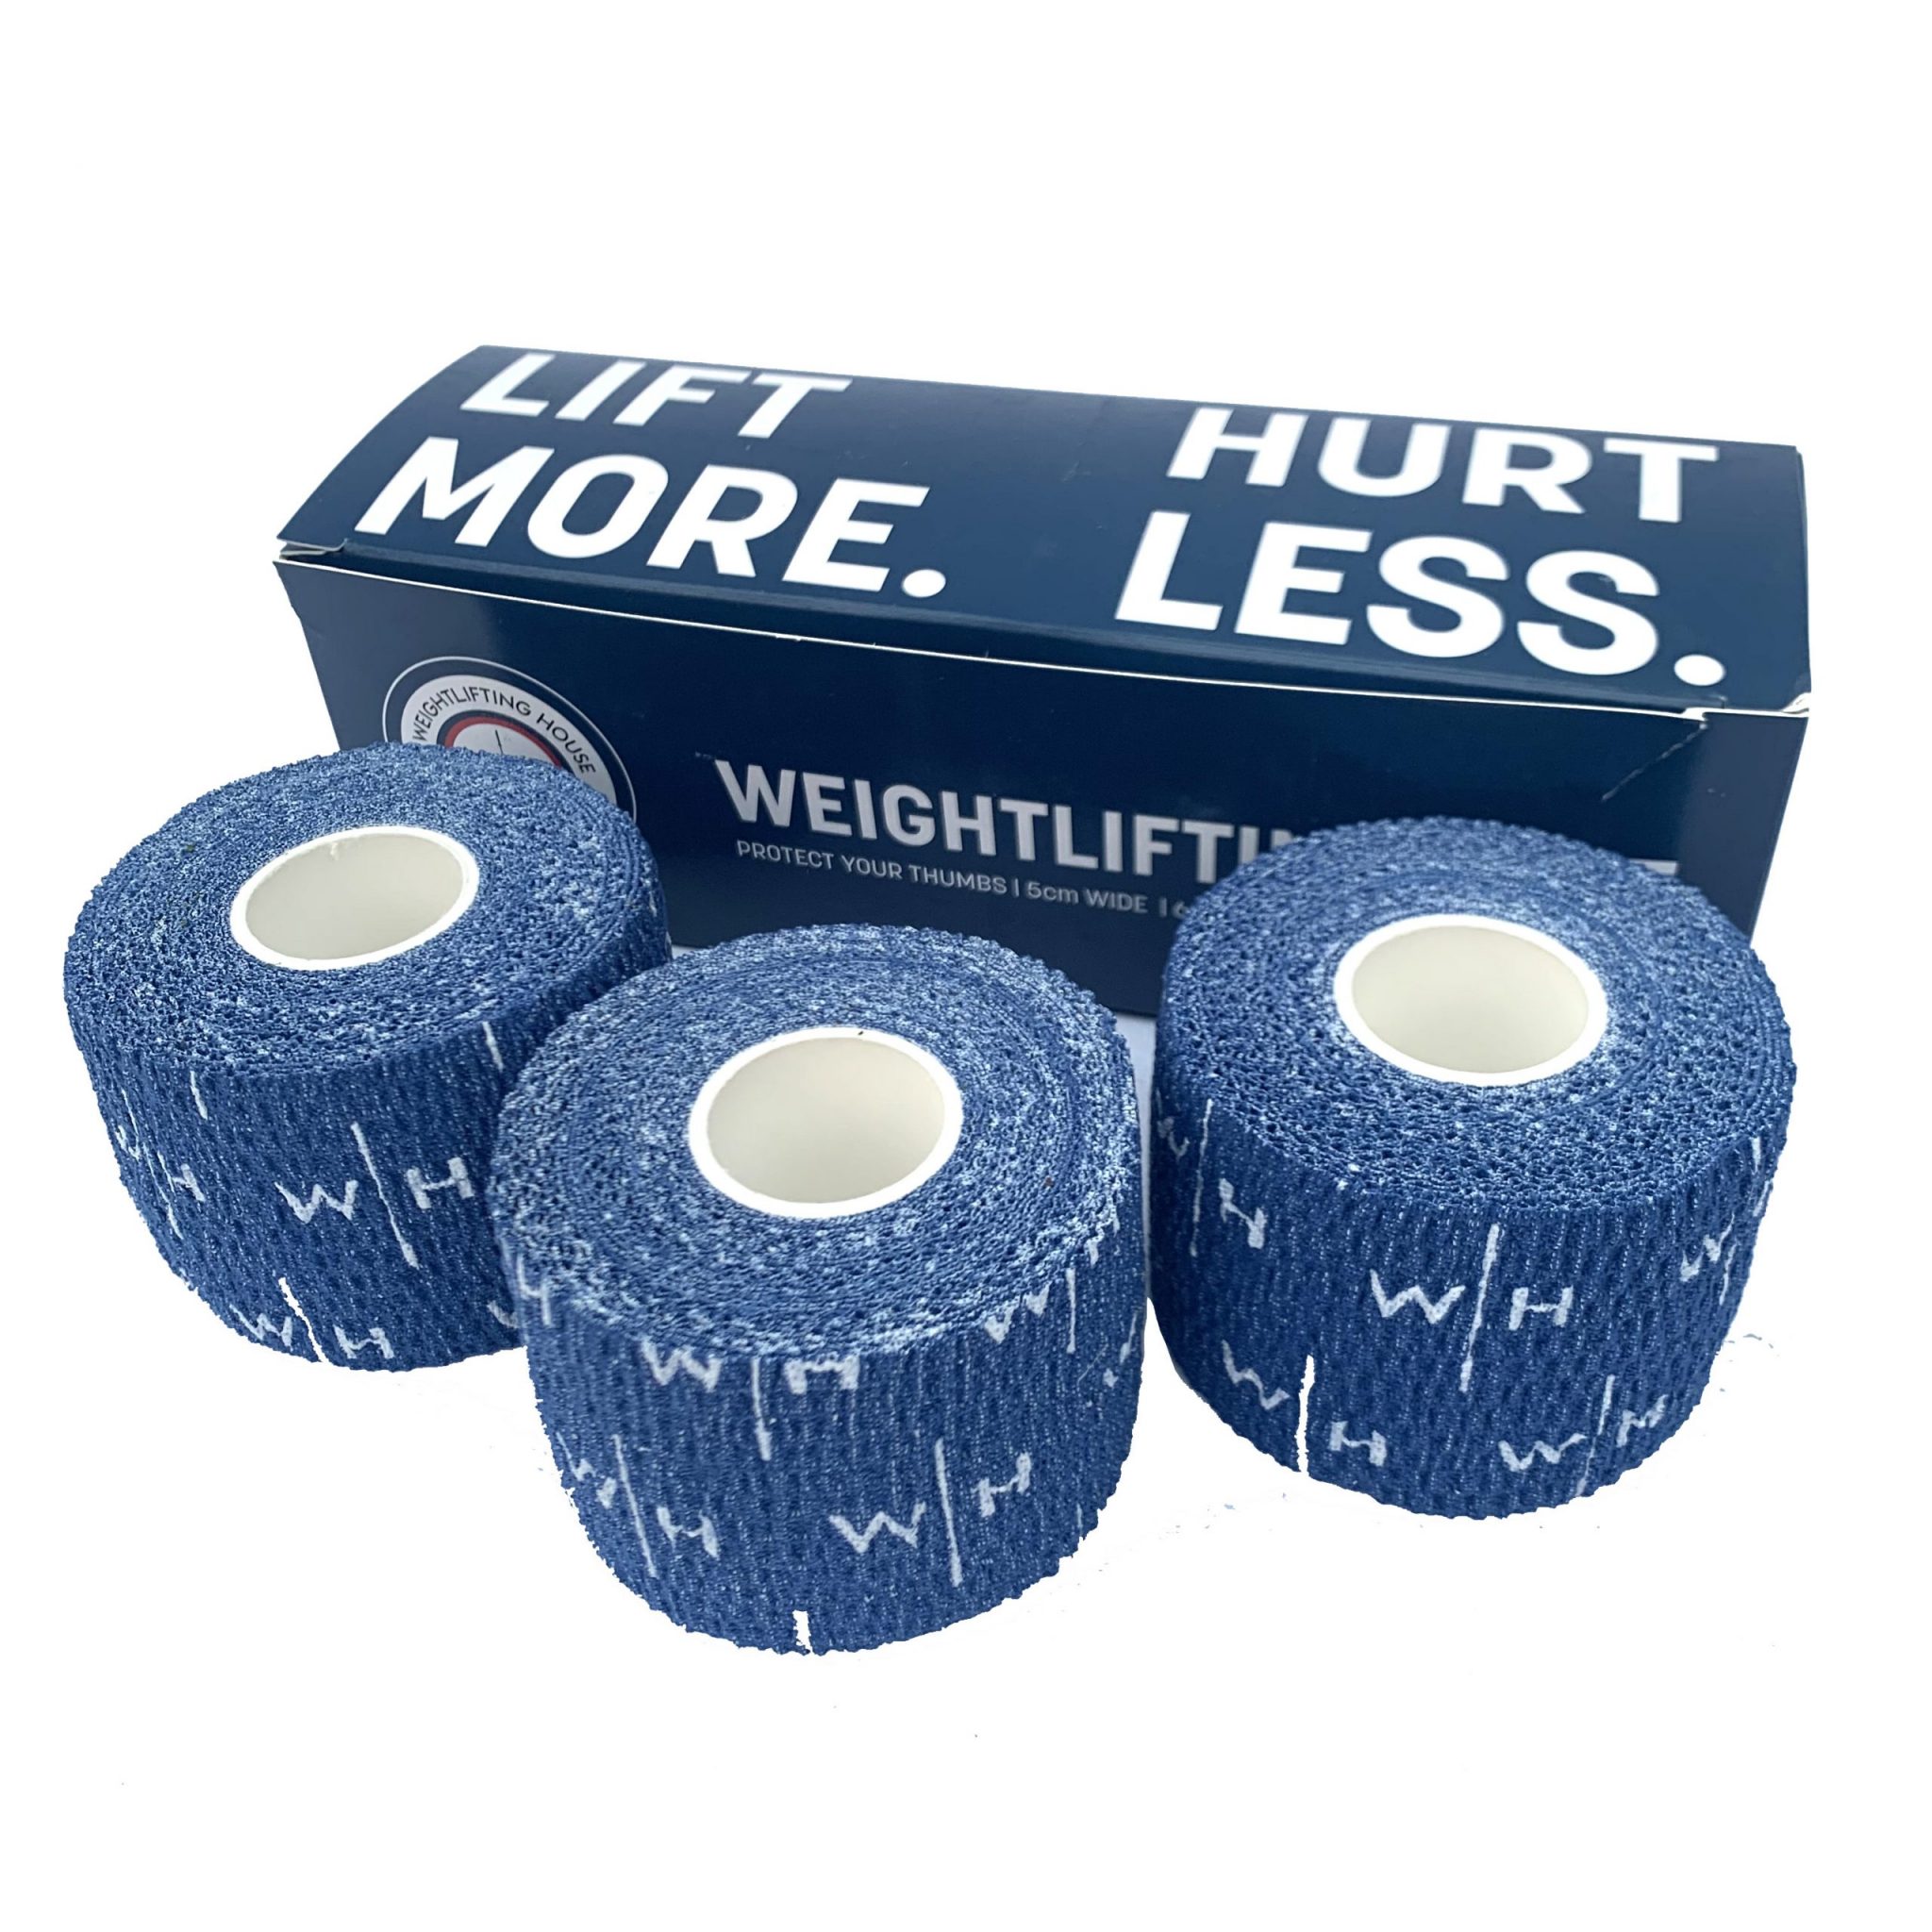 Murgs Weightlifting Thumb Tape Ultra (24m/78ft) 3X 8m Long Adhesive  Weightlifting Tape, 100% Rayon Cotton Athletic Tape - Sports Tape for  Gymnastics